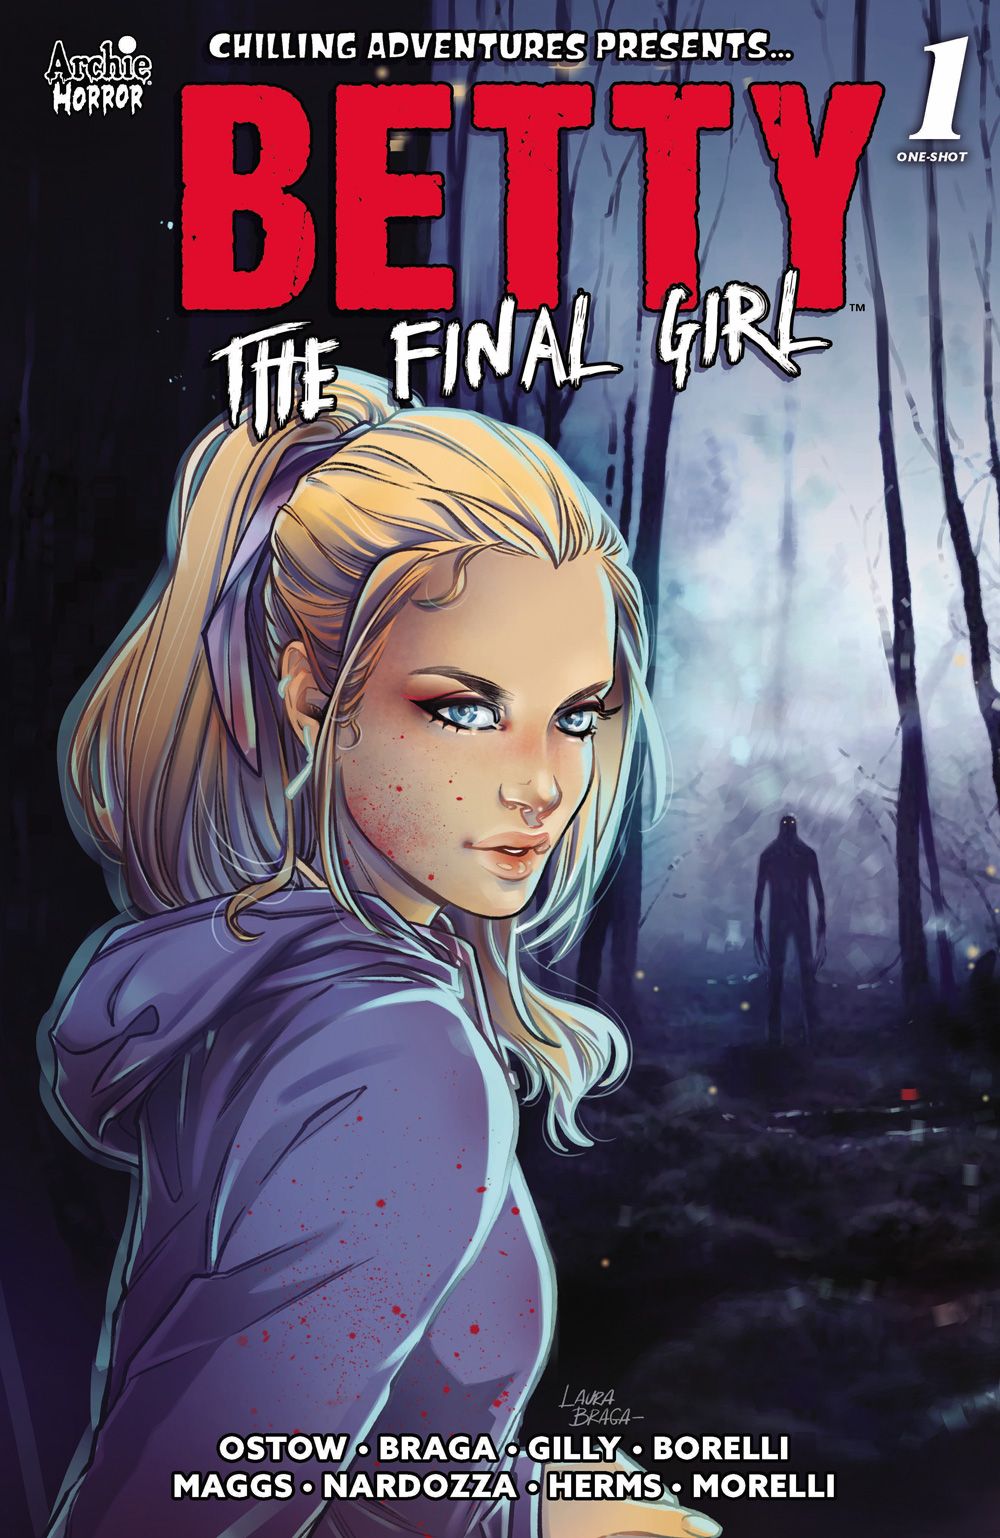 GoCollect Blog: Archie Comics icon Betty Cooper is THE FINAL GIRL